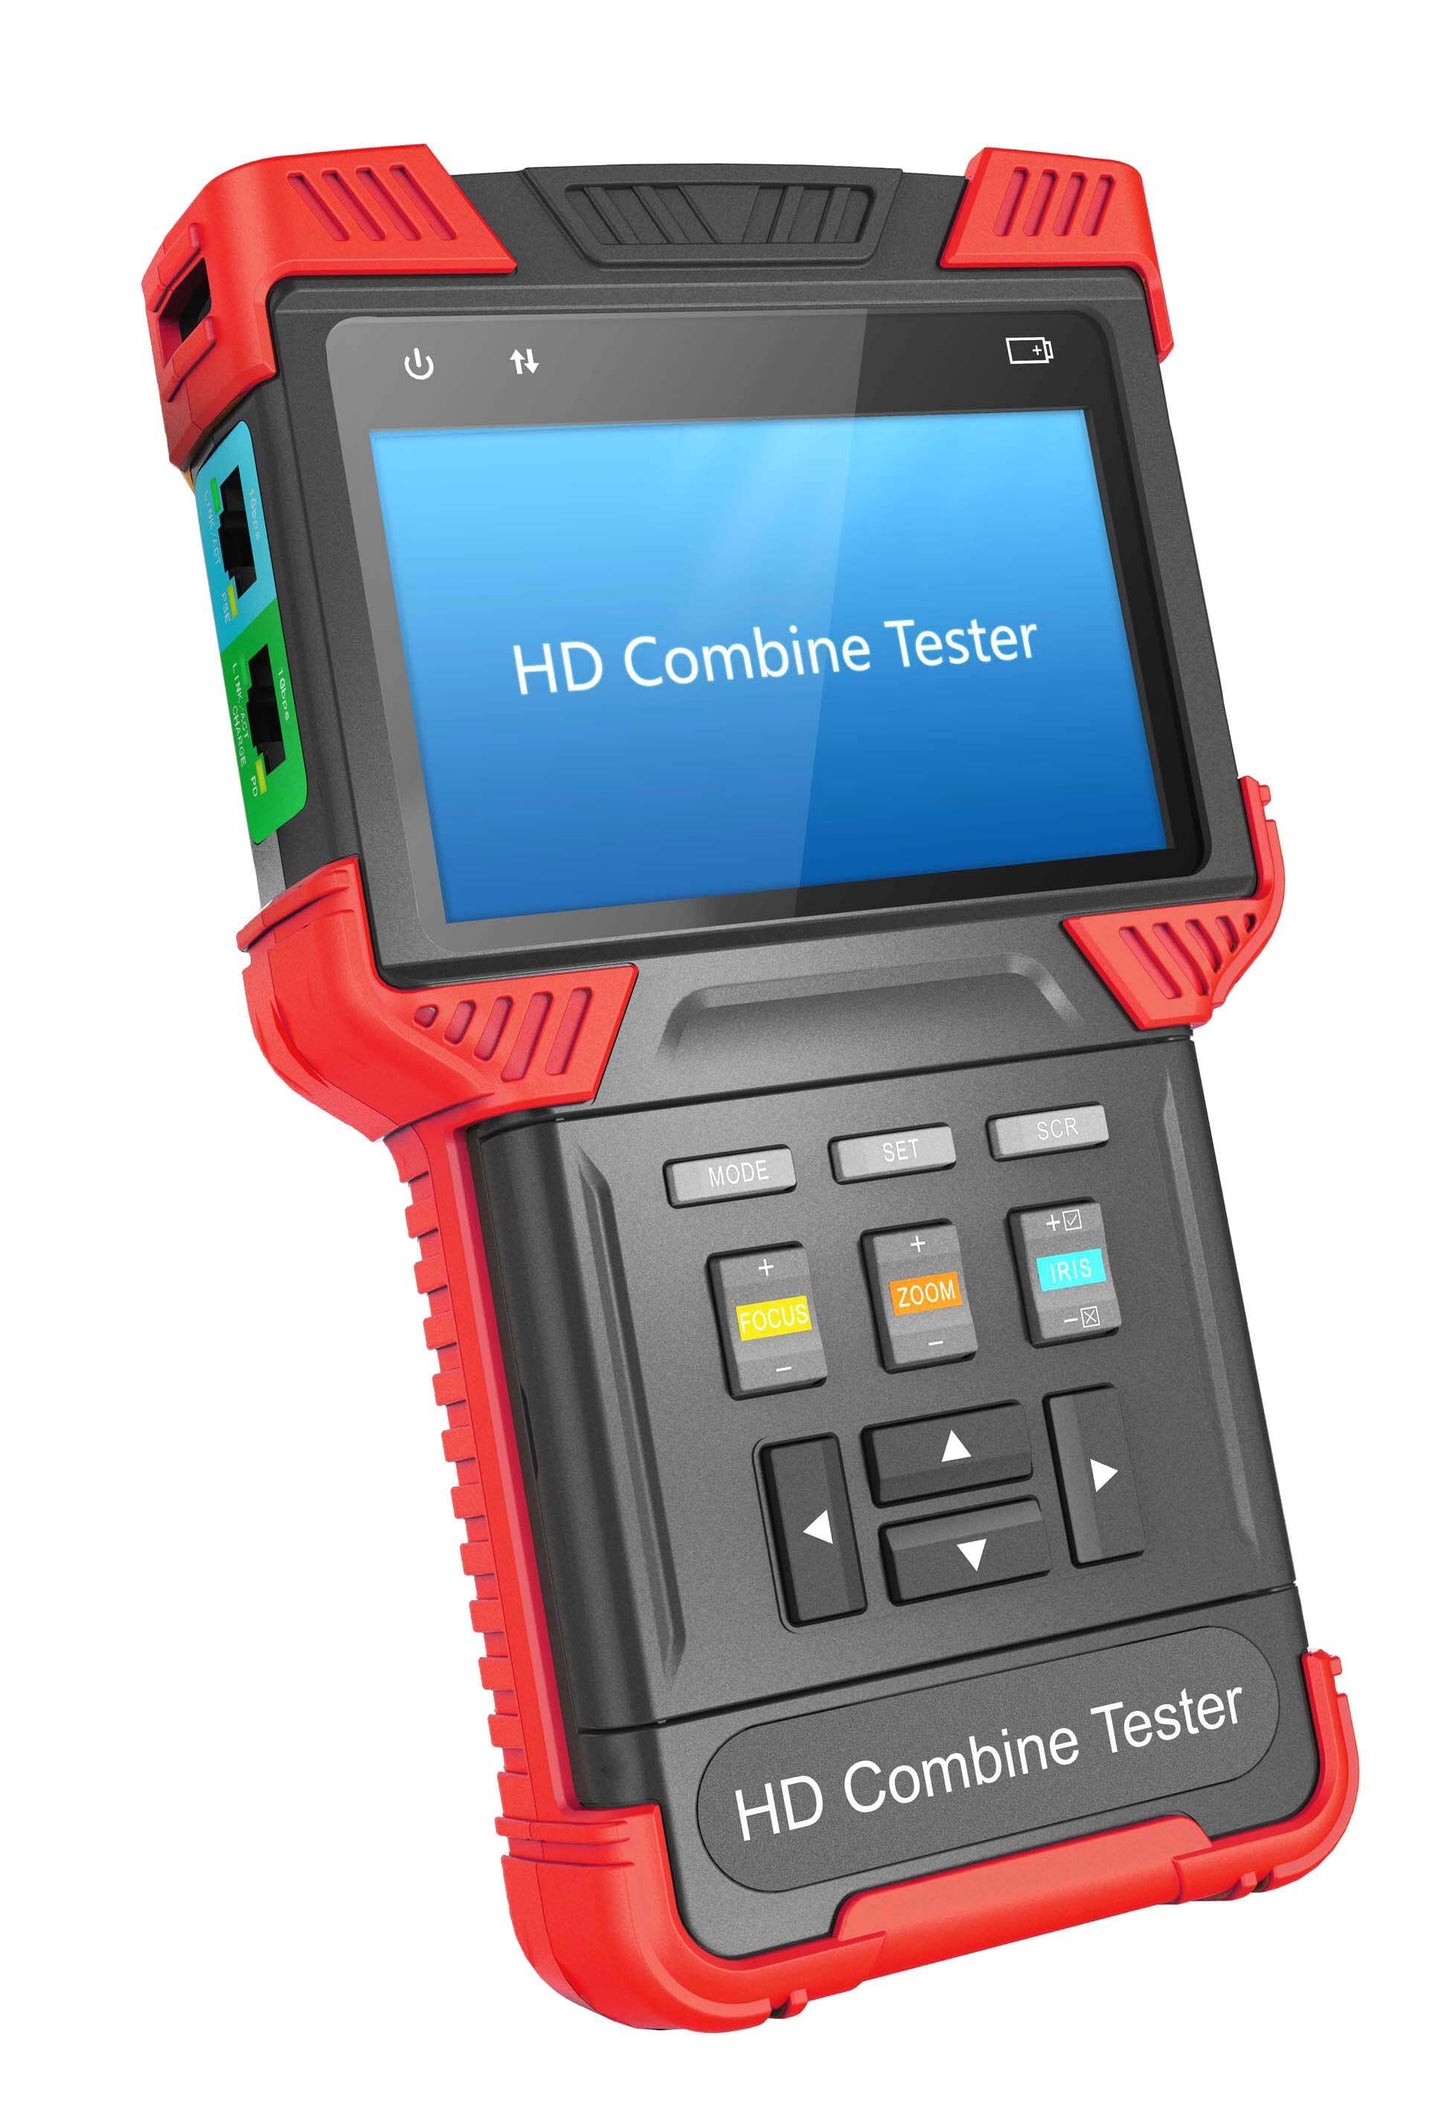 DT-T72  IP Camera Tester H.265/H.264 CCTV Tester Monitor4.0 Inch HD Combine Tester Support 3.0 CVI TVI AHD&Analog Camera Testing